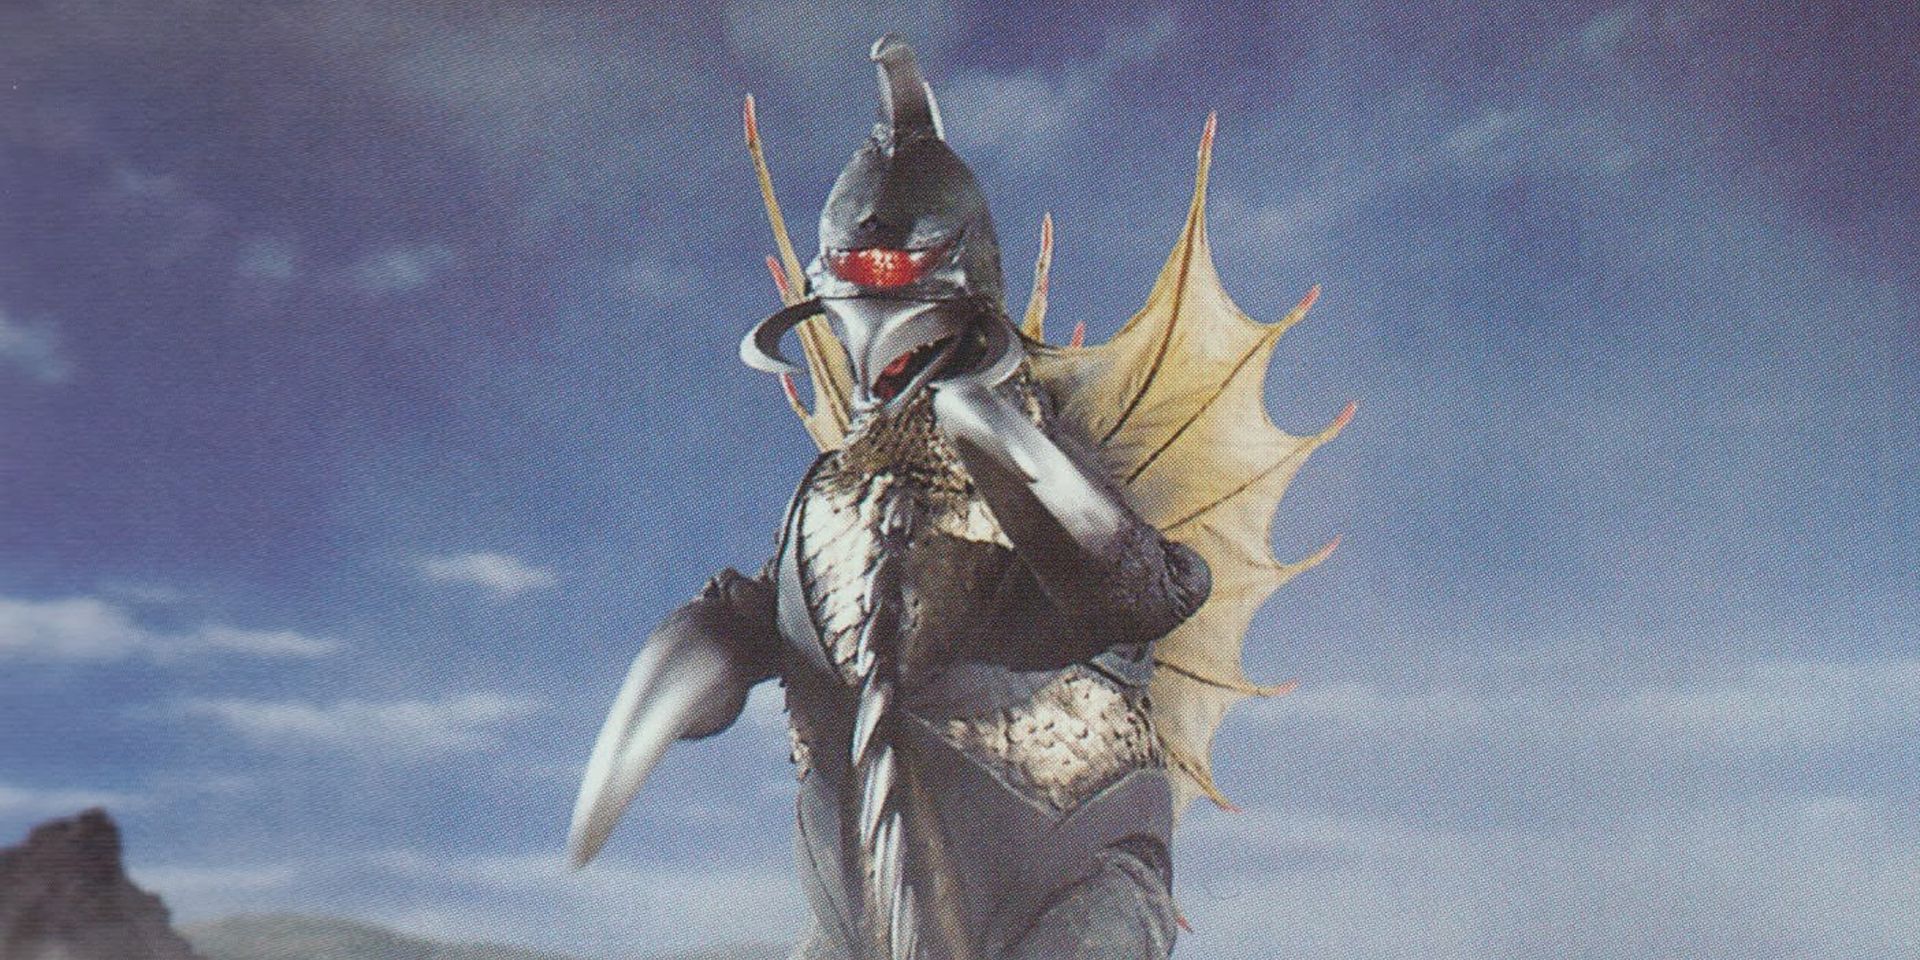 Gigan taunts the heroes.